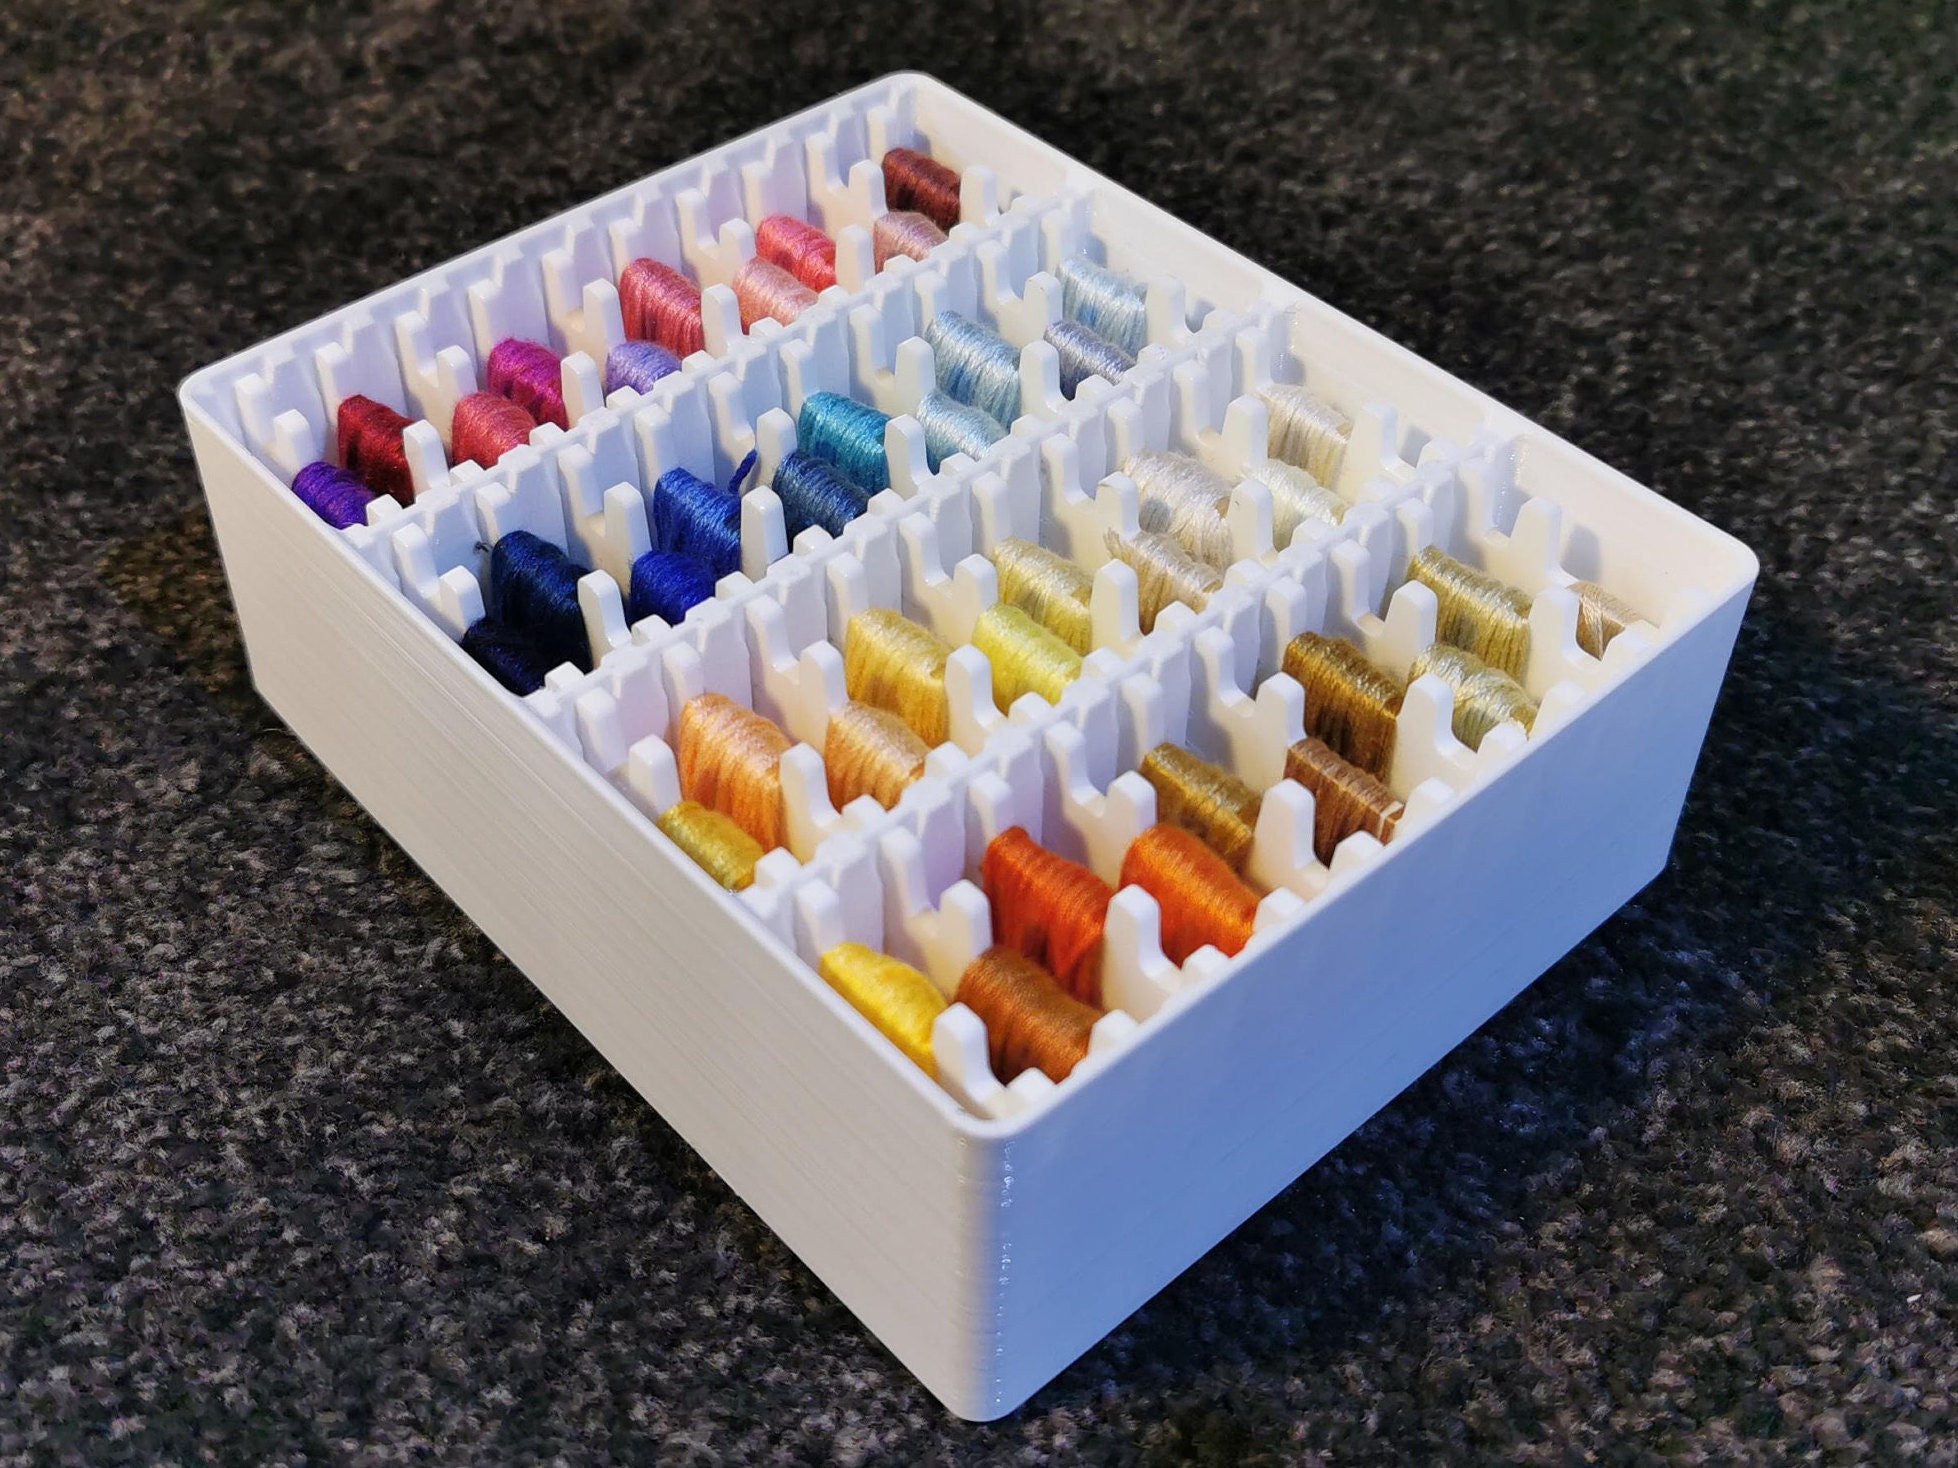 Embroidery Floss Set, 24/48/72/120colors Cross Stitch Embroidery Thread  With Bobbins and Storage Box, Matches DMC Floss-4/8 Meters 1 Skein 